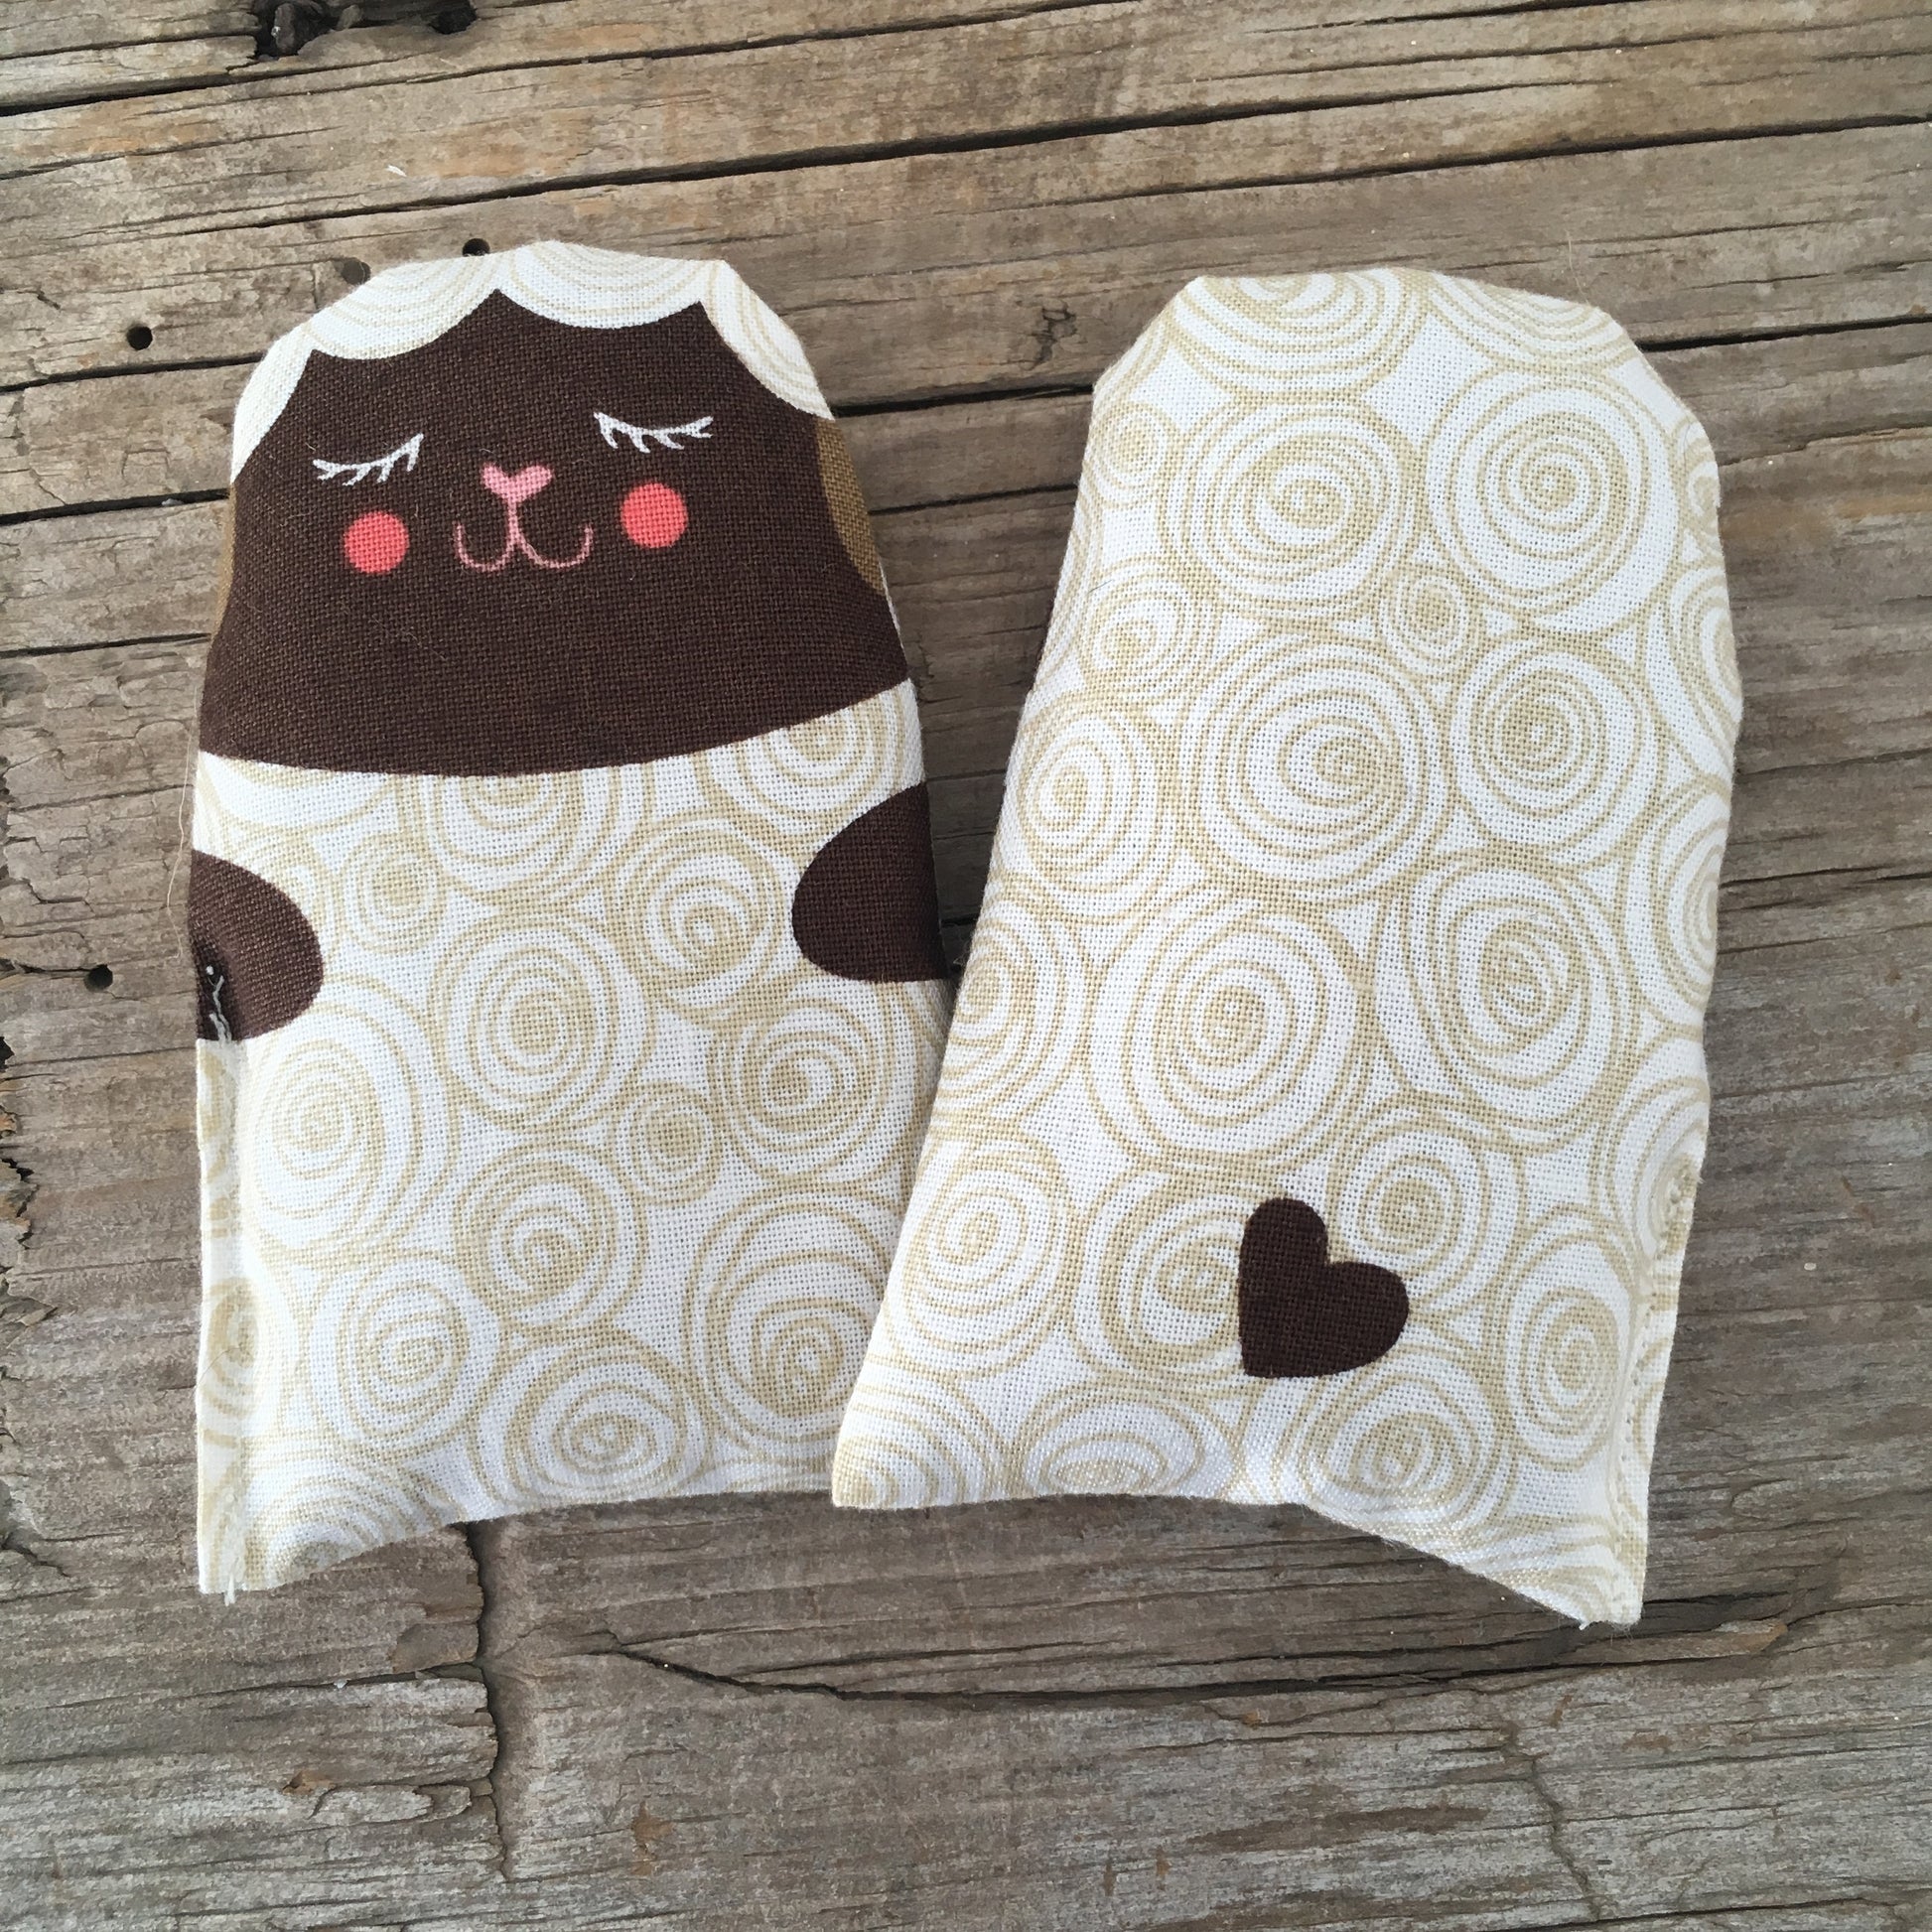 Farm Animals - Hand Warmers / Pouchies for Ouchies - Tub Loves